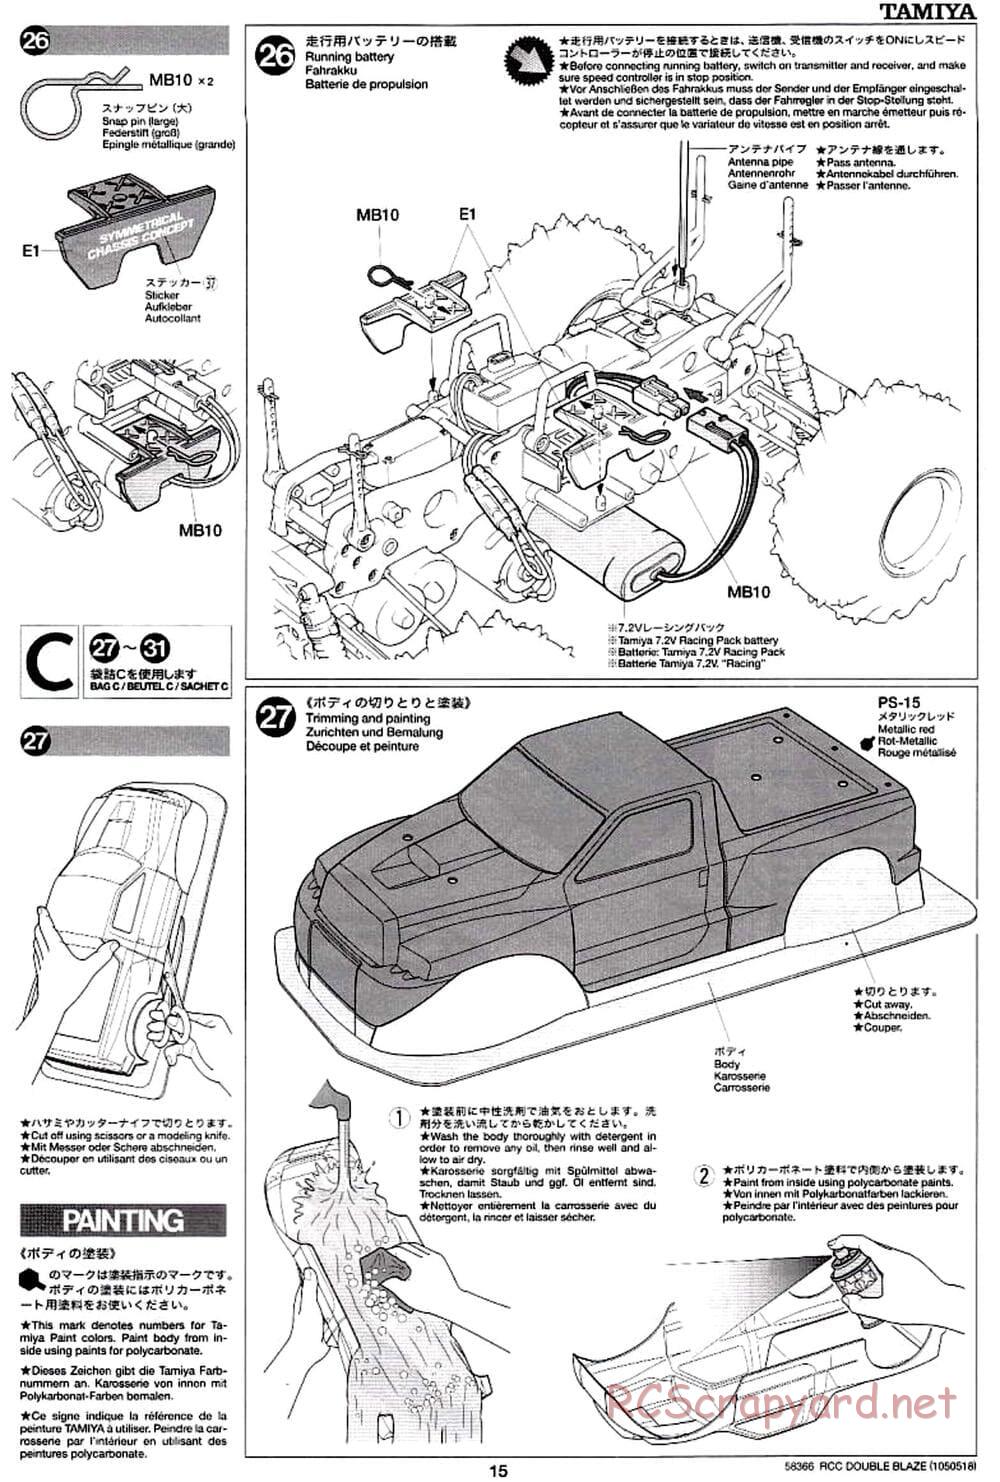 Tamiya - Double Blaze - WR-01 Chassis - Manual - Page 15